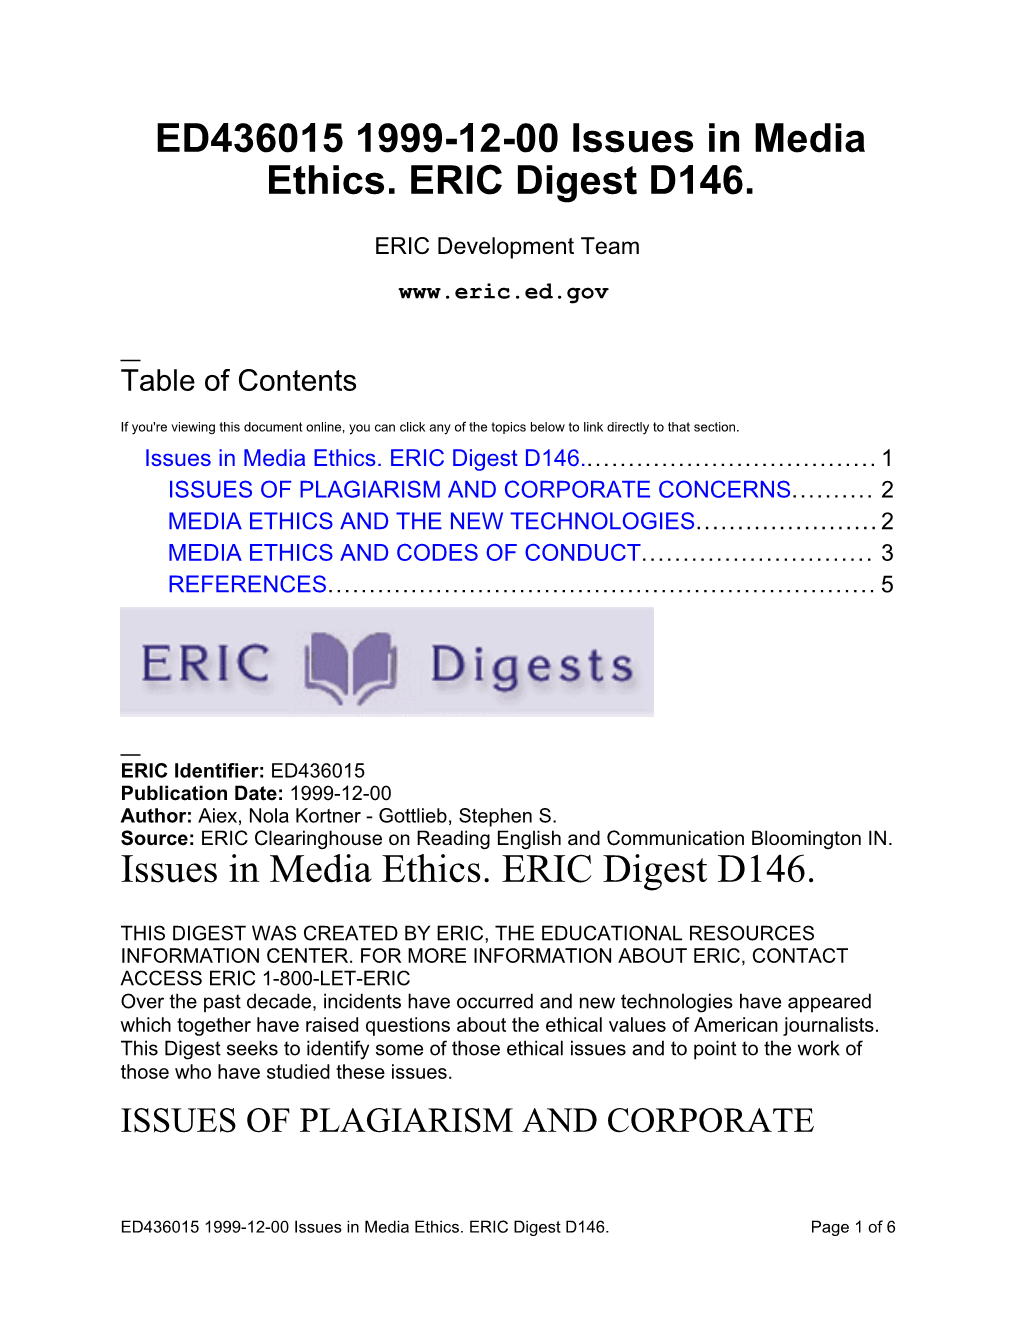 Issues in Media Ethics. ERIC Digest D146